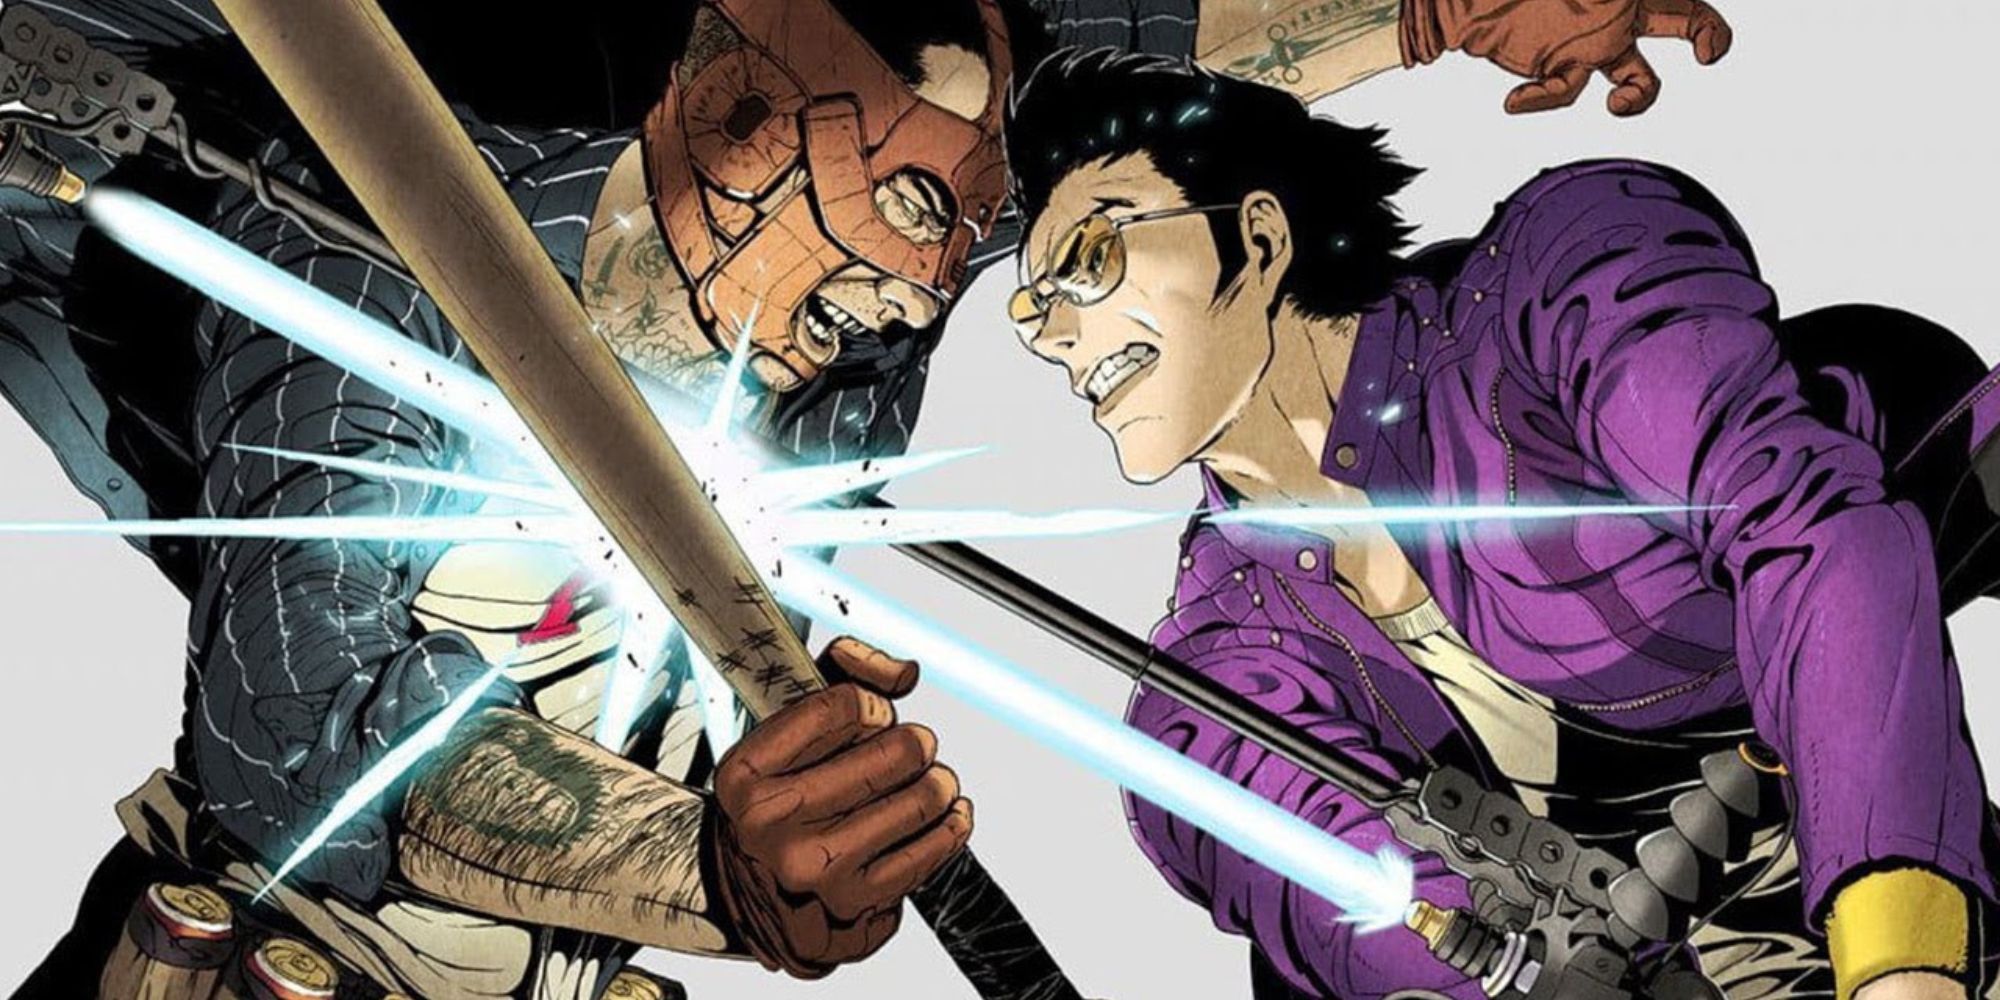 Travis Touchdown clashes weapons with Badman